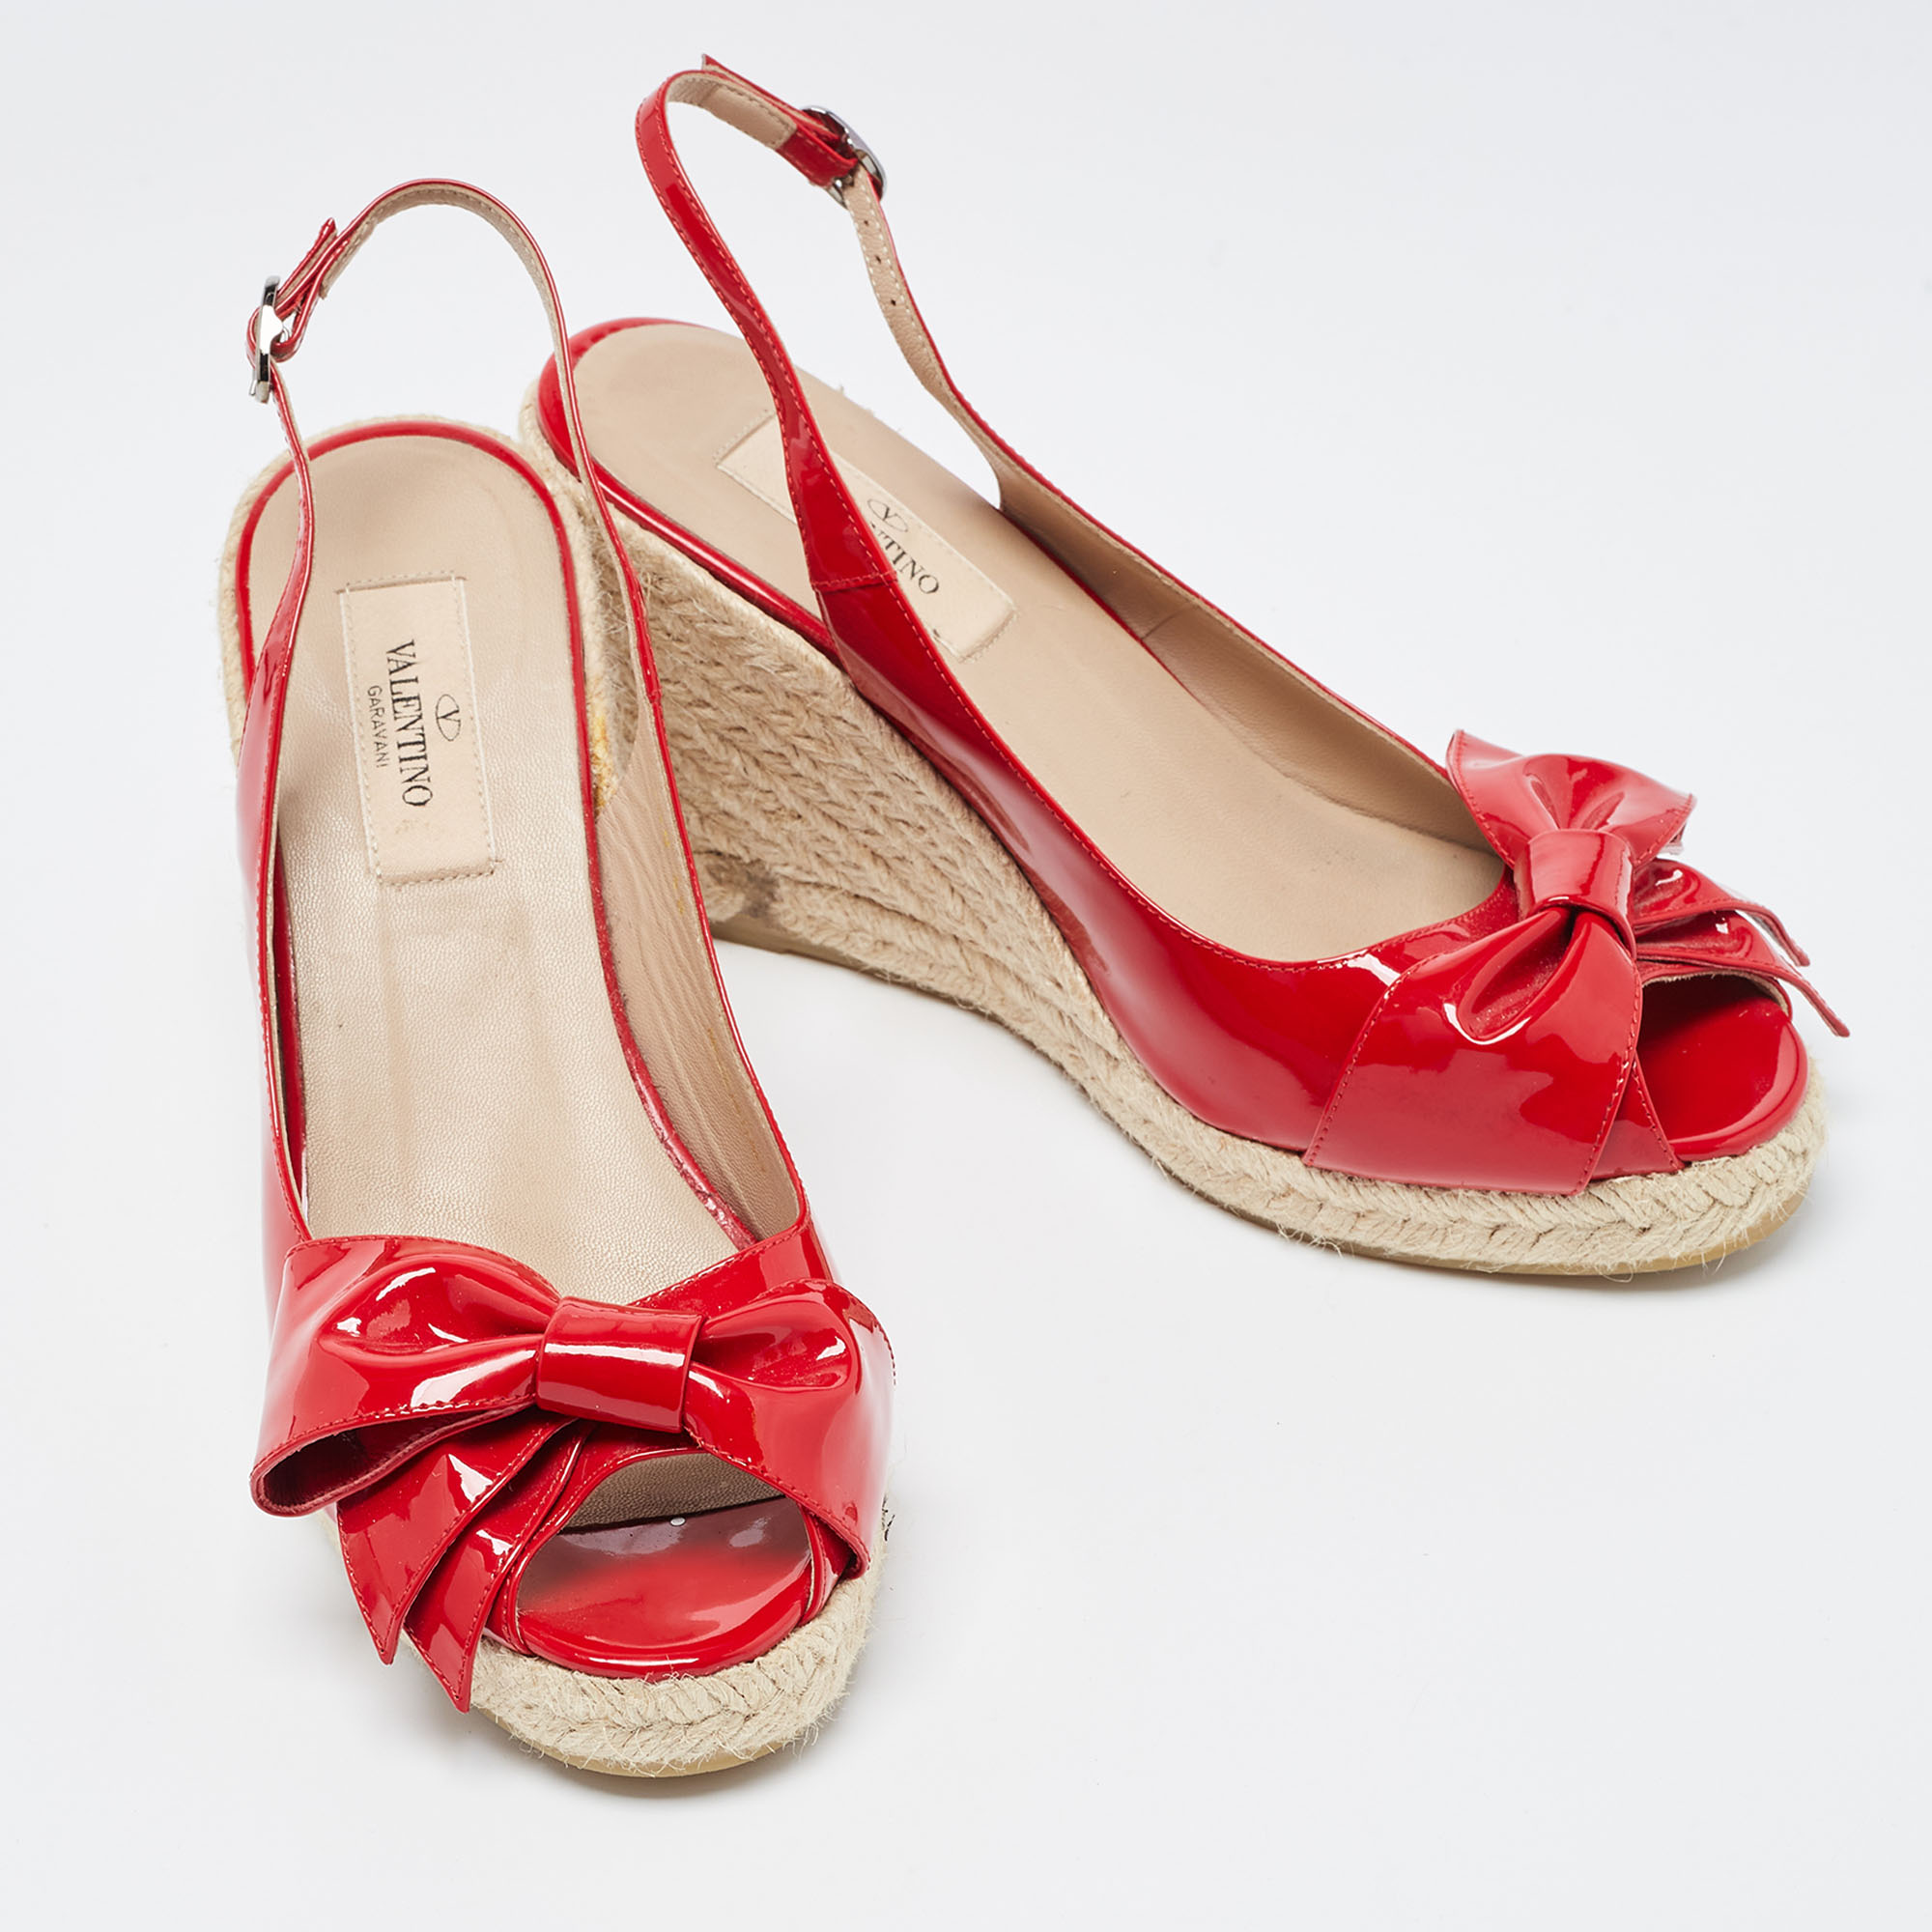 Valentino Red  Patent Leather Mena Bow Peep Toe Espadrille Wedge Slingback Sandals Size 38